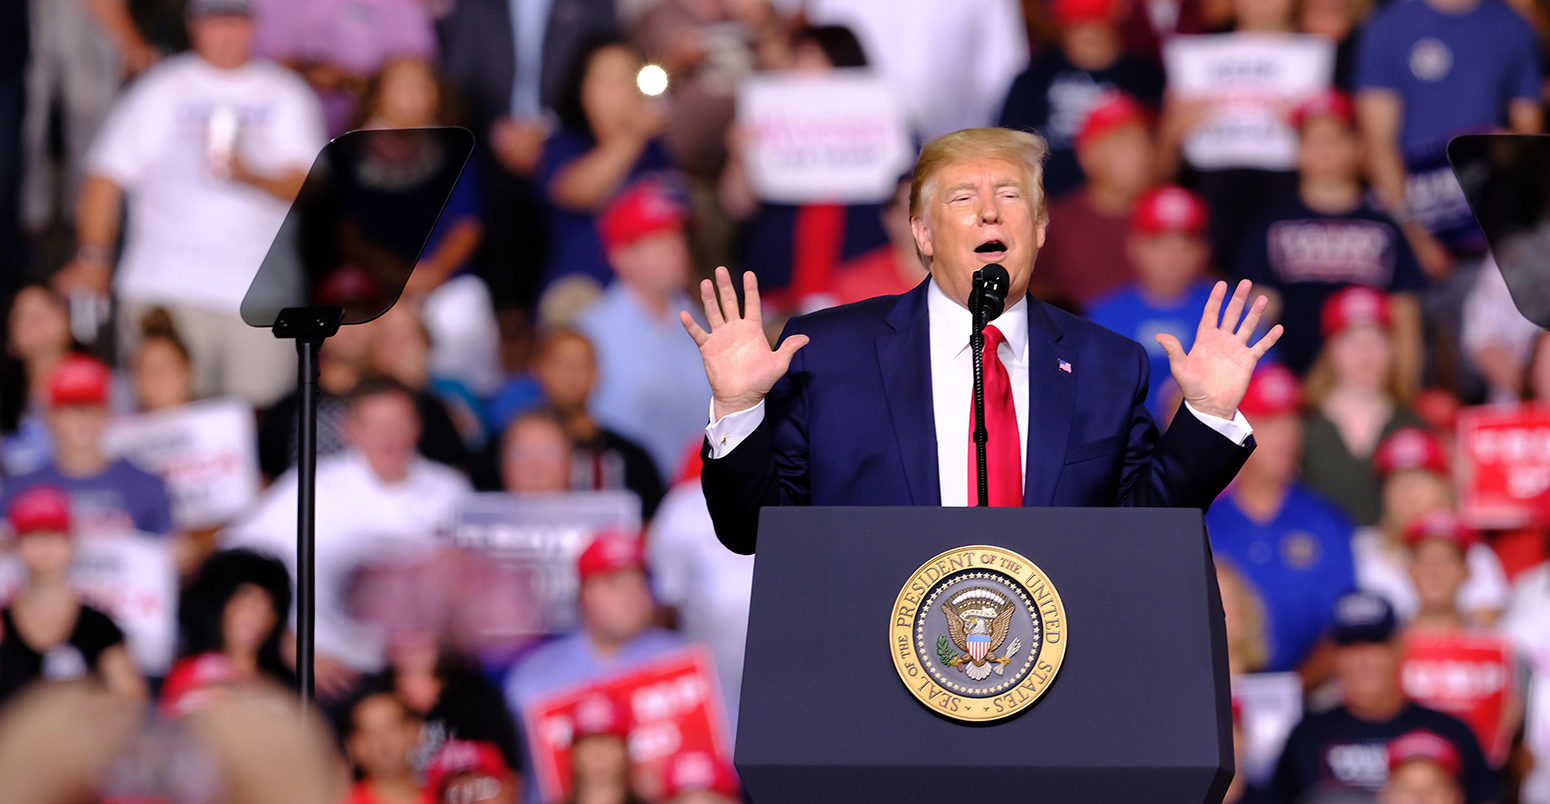 President Donald Trump speaks at a campaign rally in 2019. Credit: SOPA Images Limited / Alamy Stock Photo.